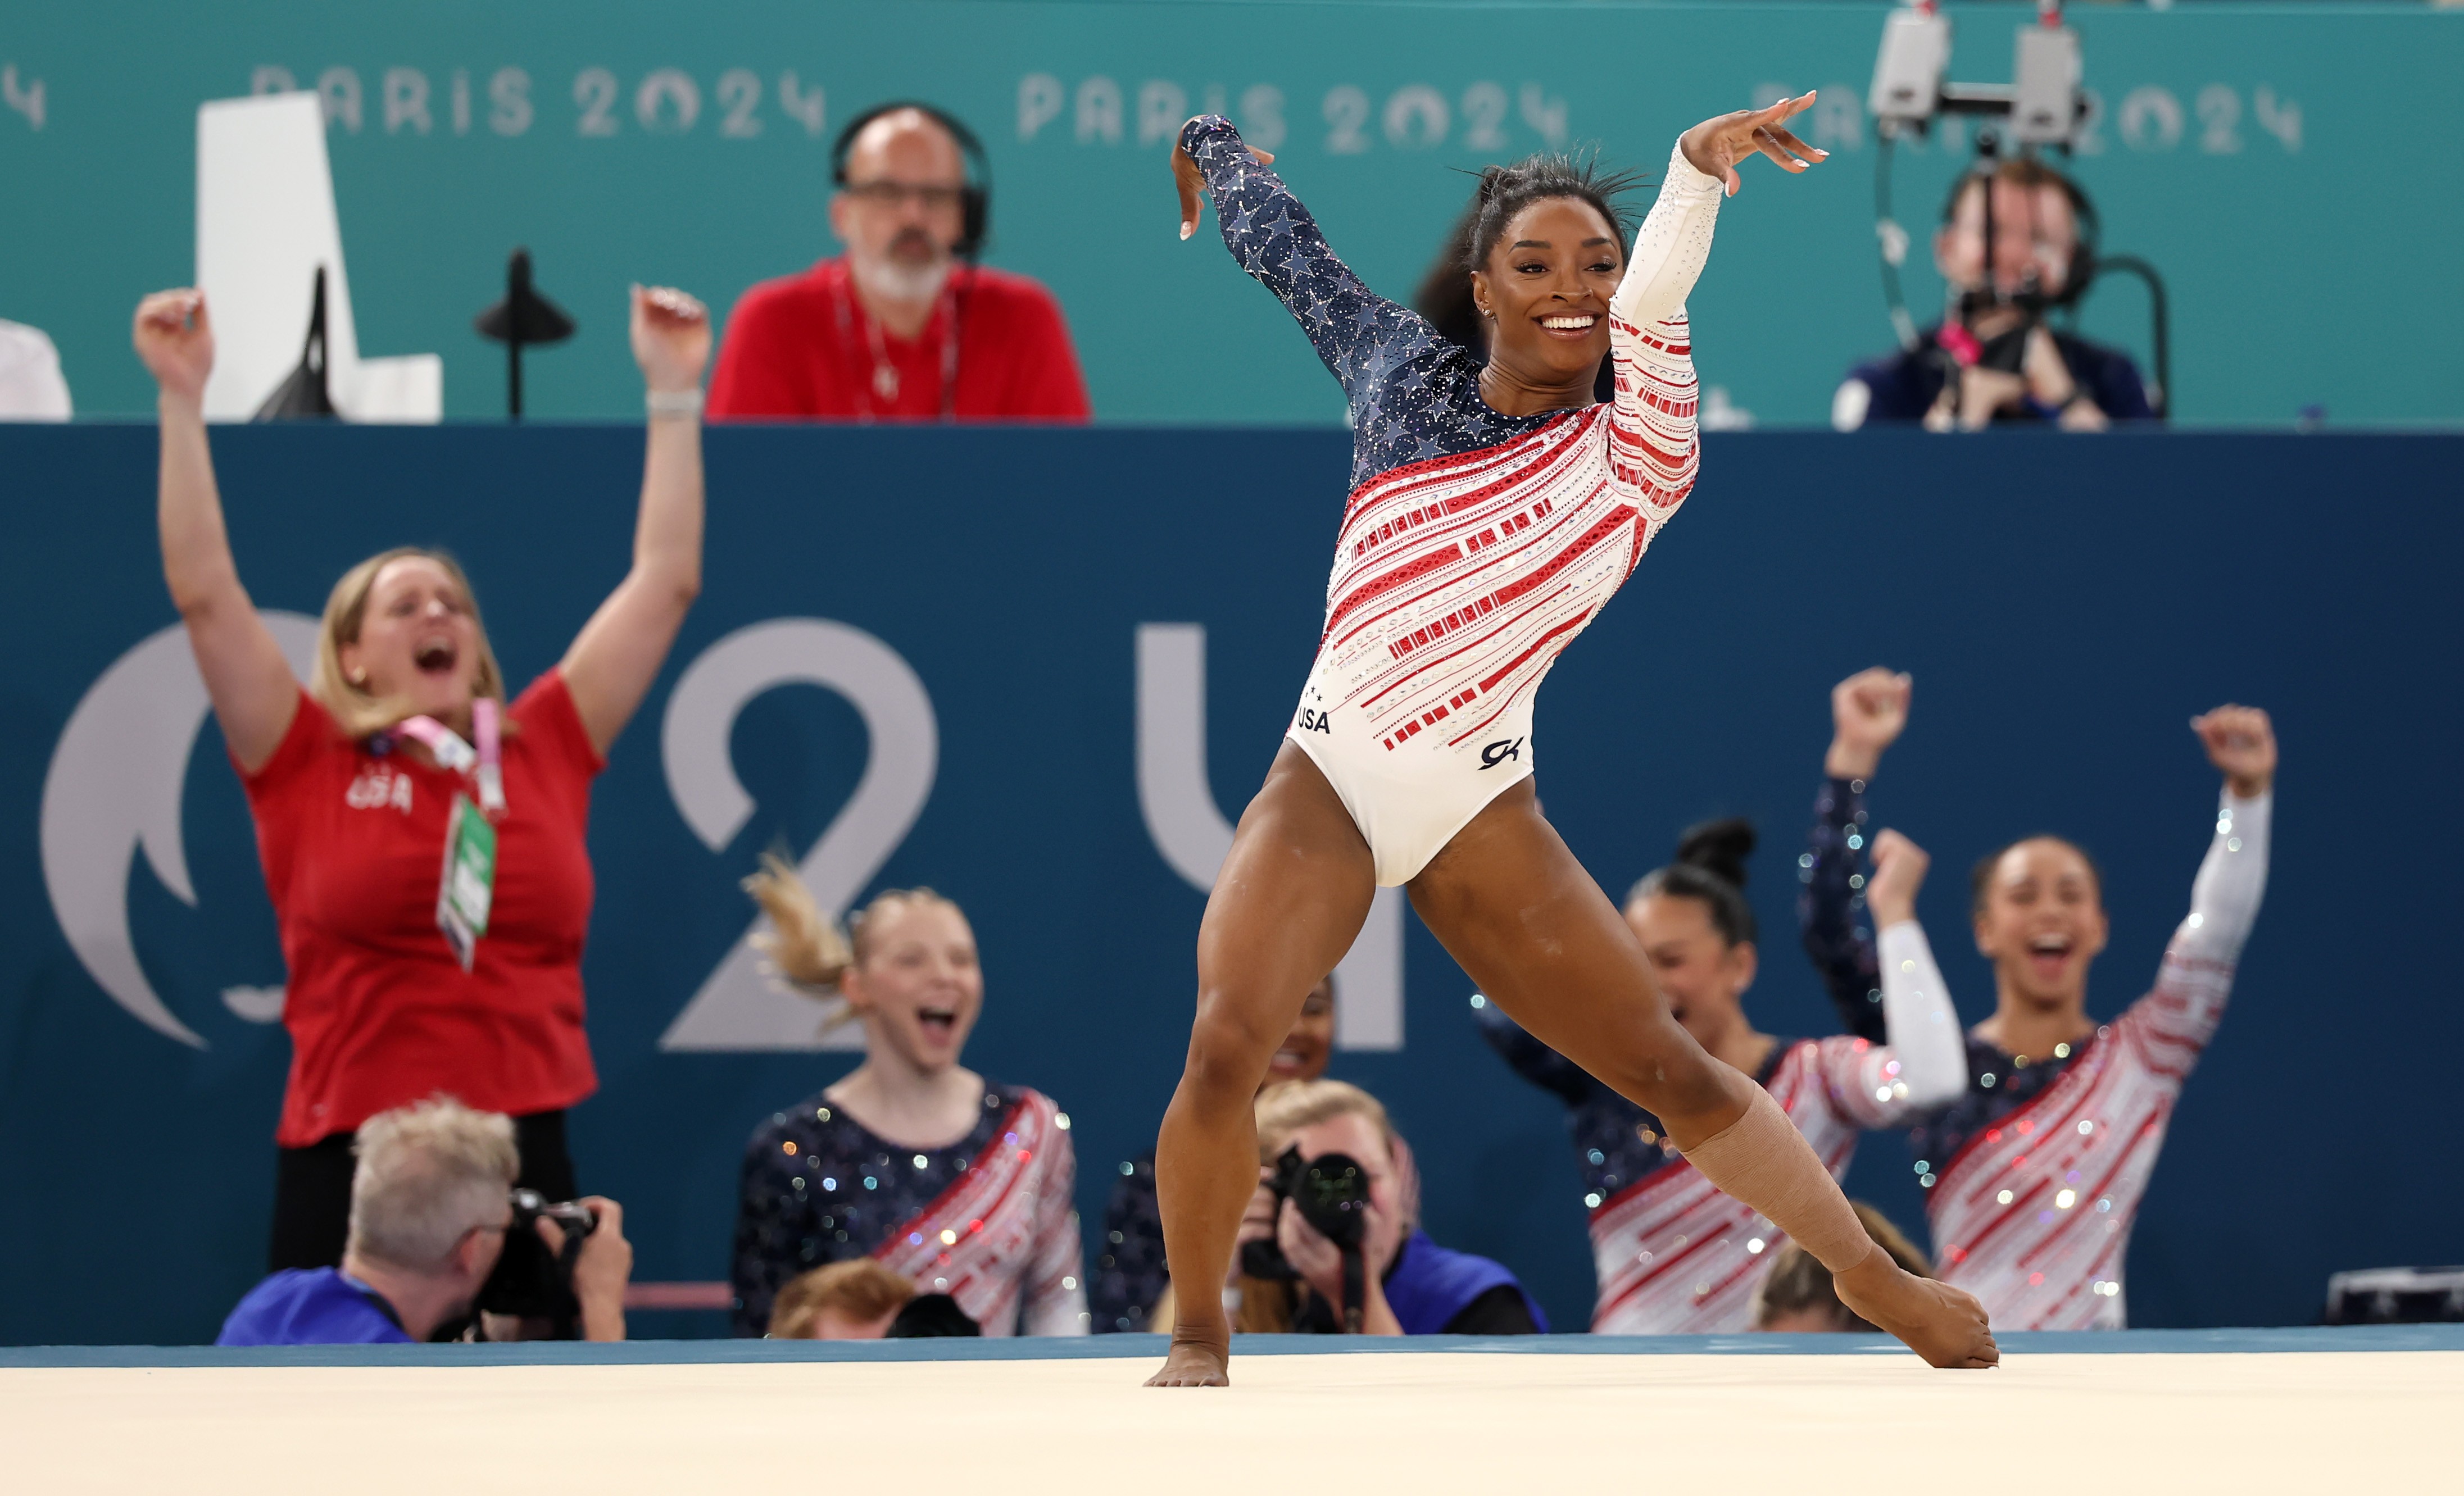 Teammates cheer in the background as a gymnast complete a floor exercise routine.